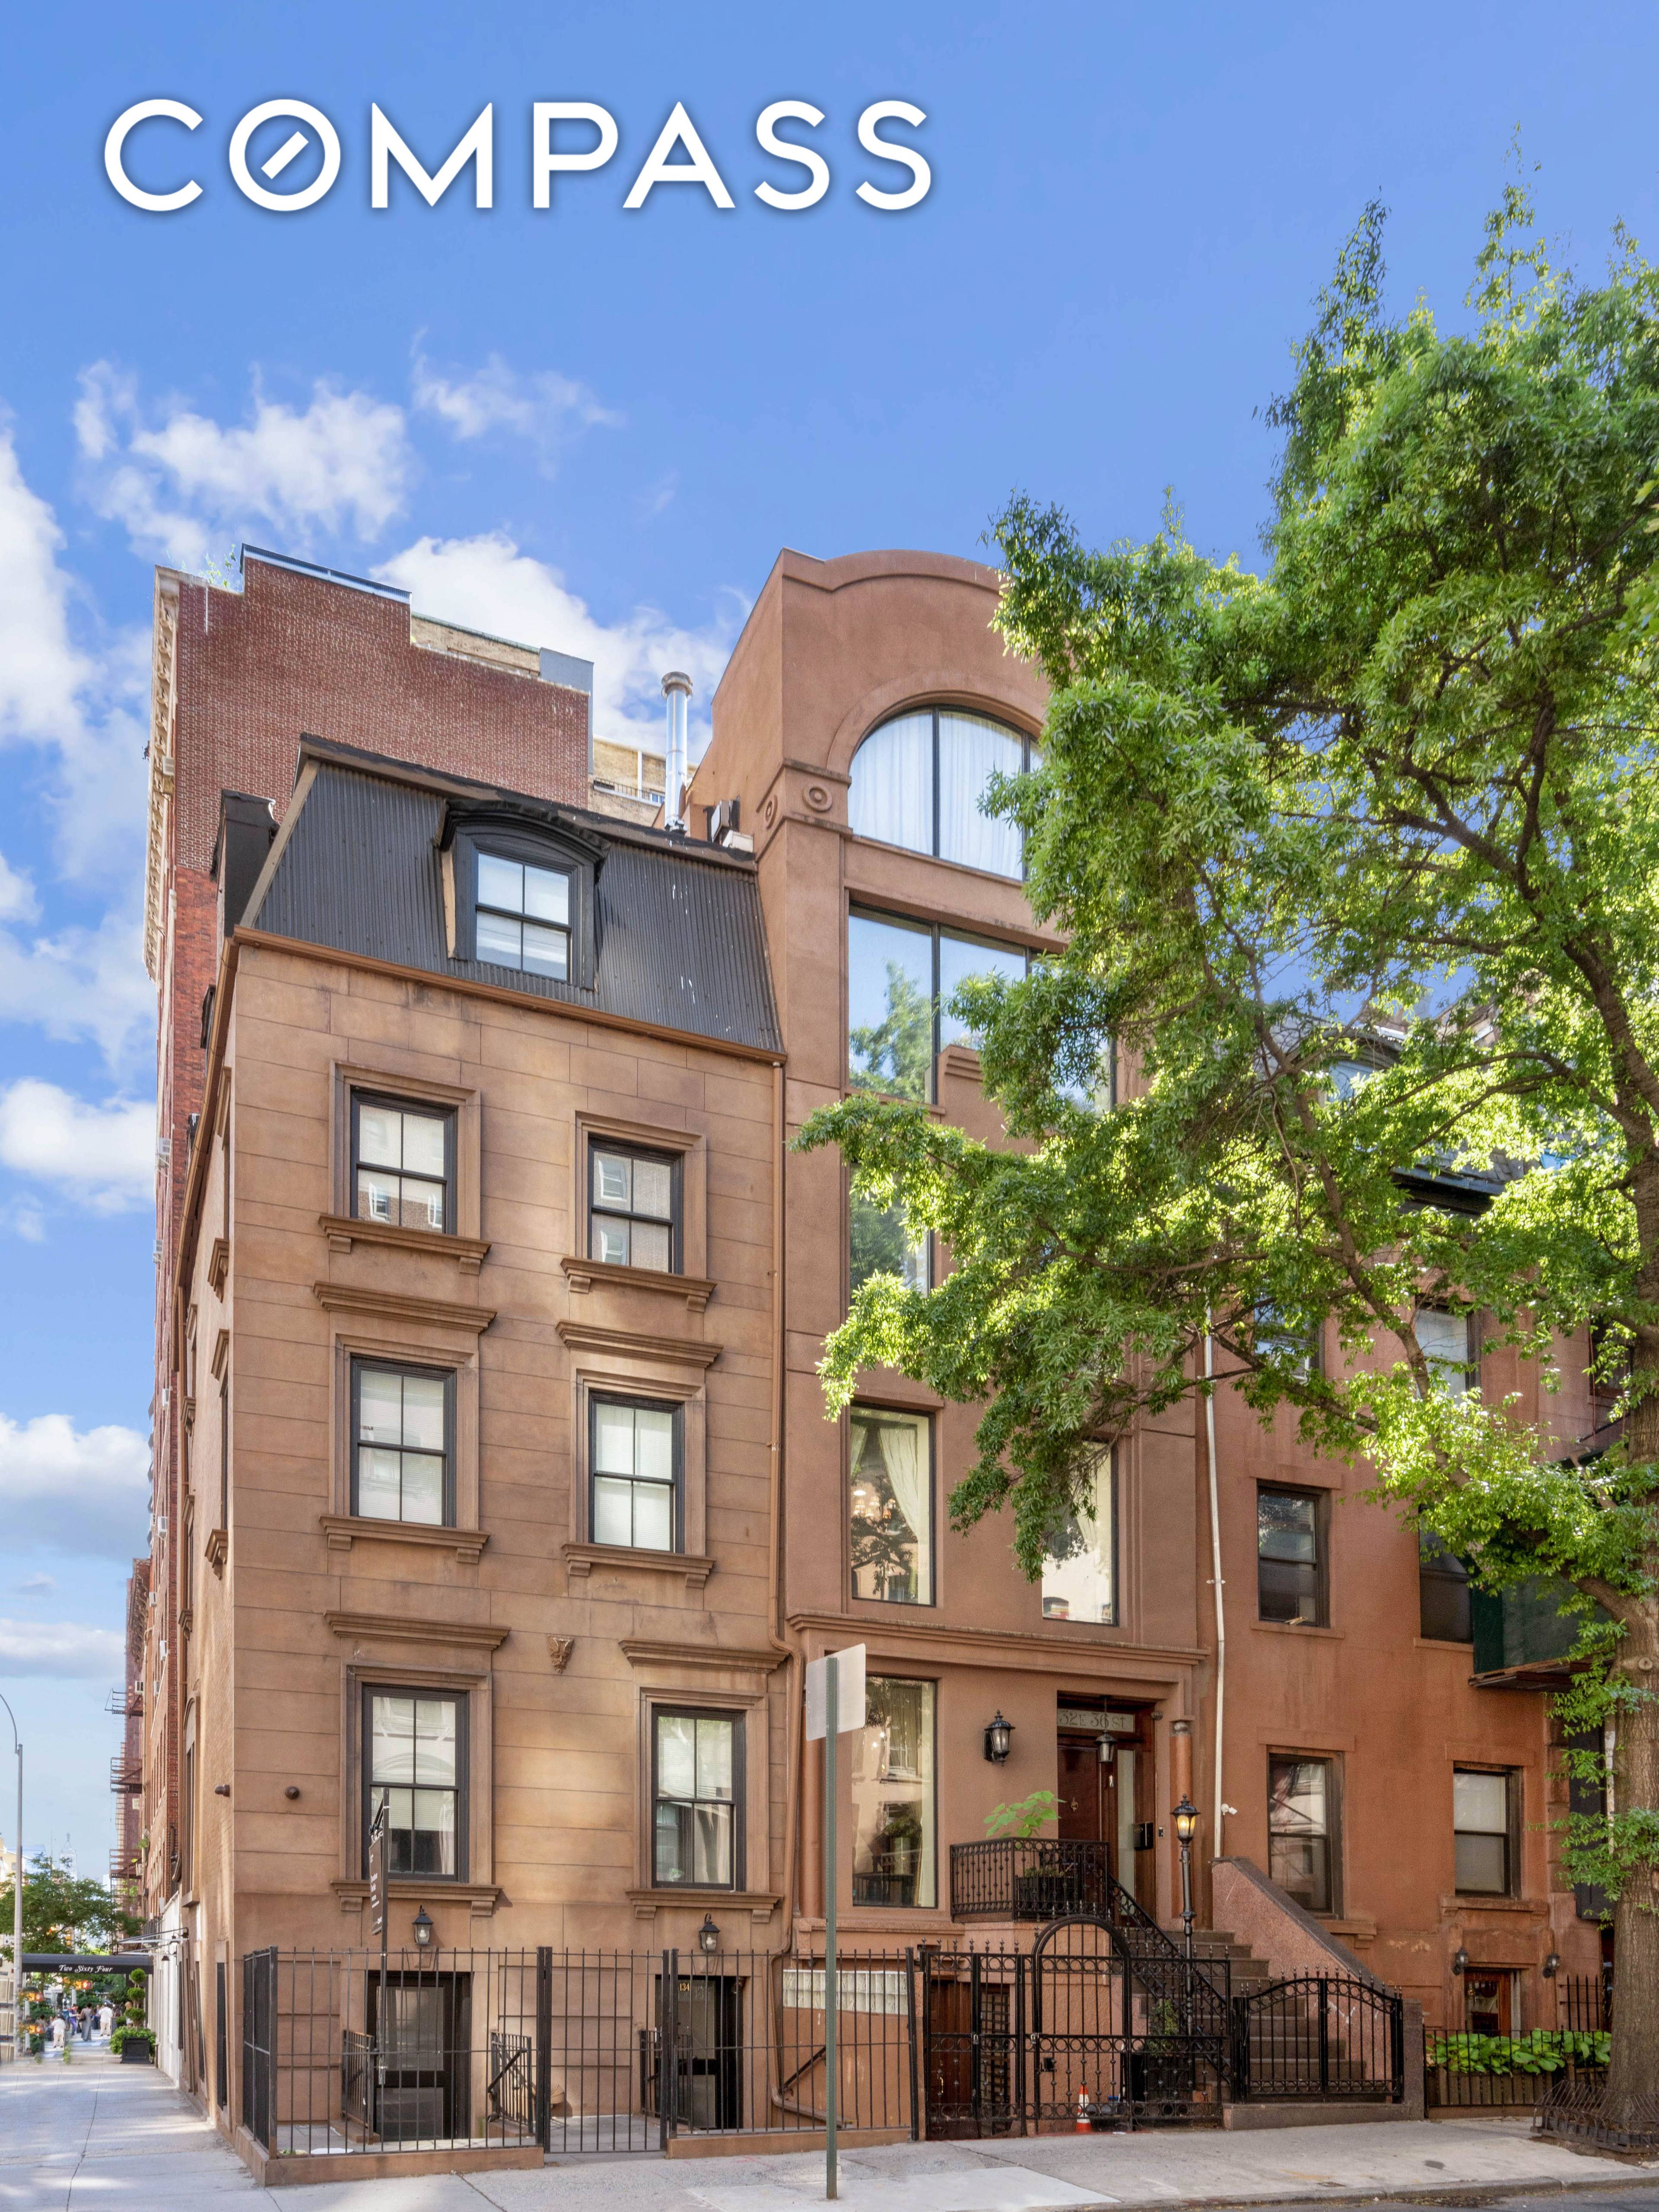 132 East 36th street is a luxurious single family Landmark Townhouse located on a beautifully landscaped block in Murray Hill.